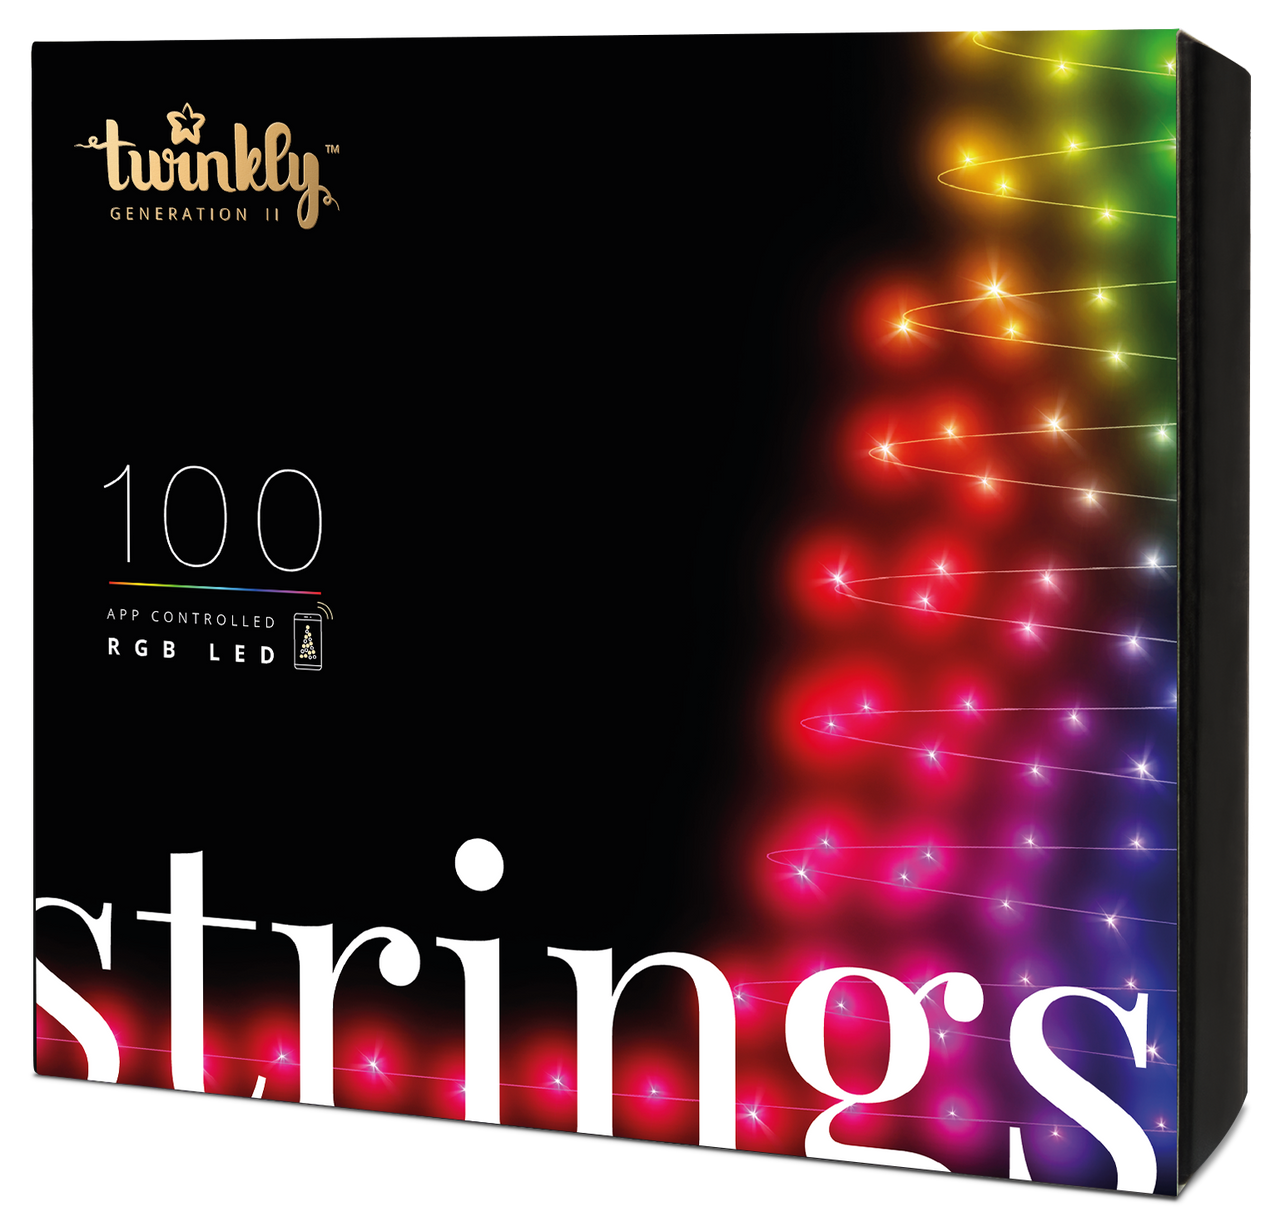 8m 100 LED Twinkly Smart App Controlled String Lights Multi Coloured